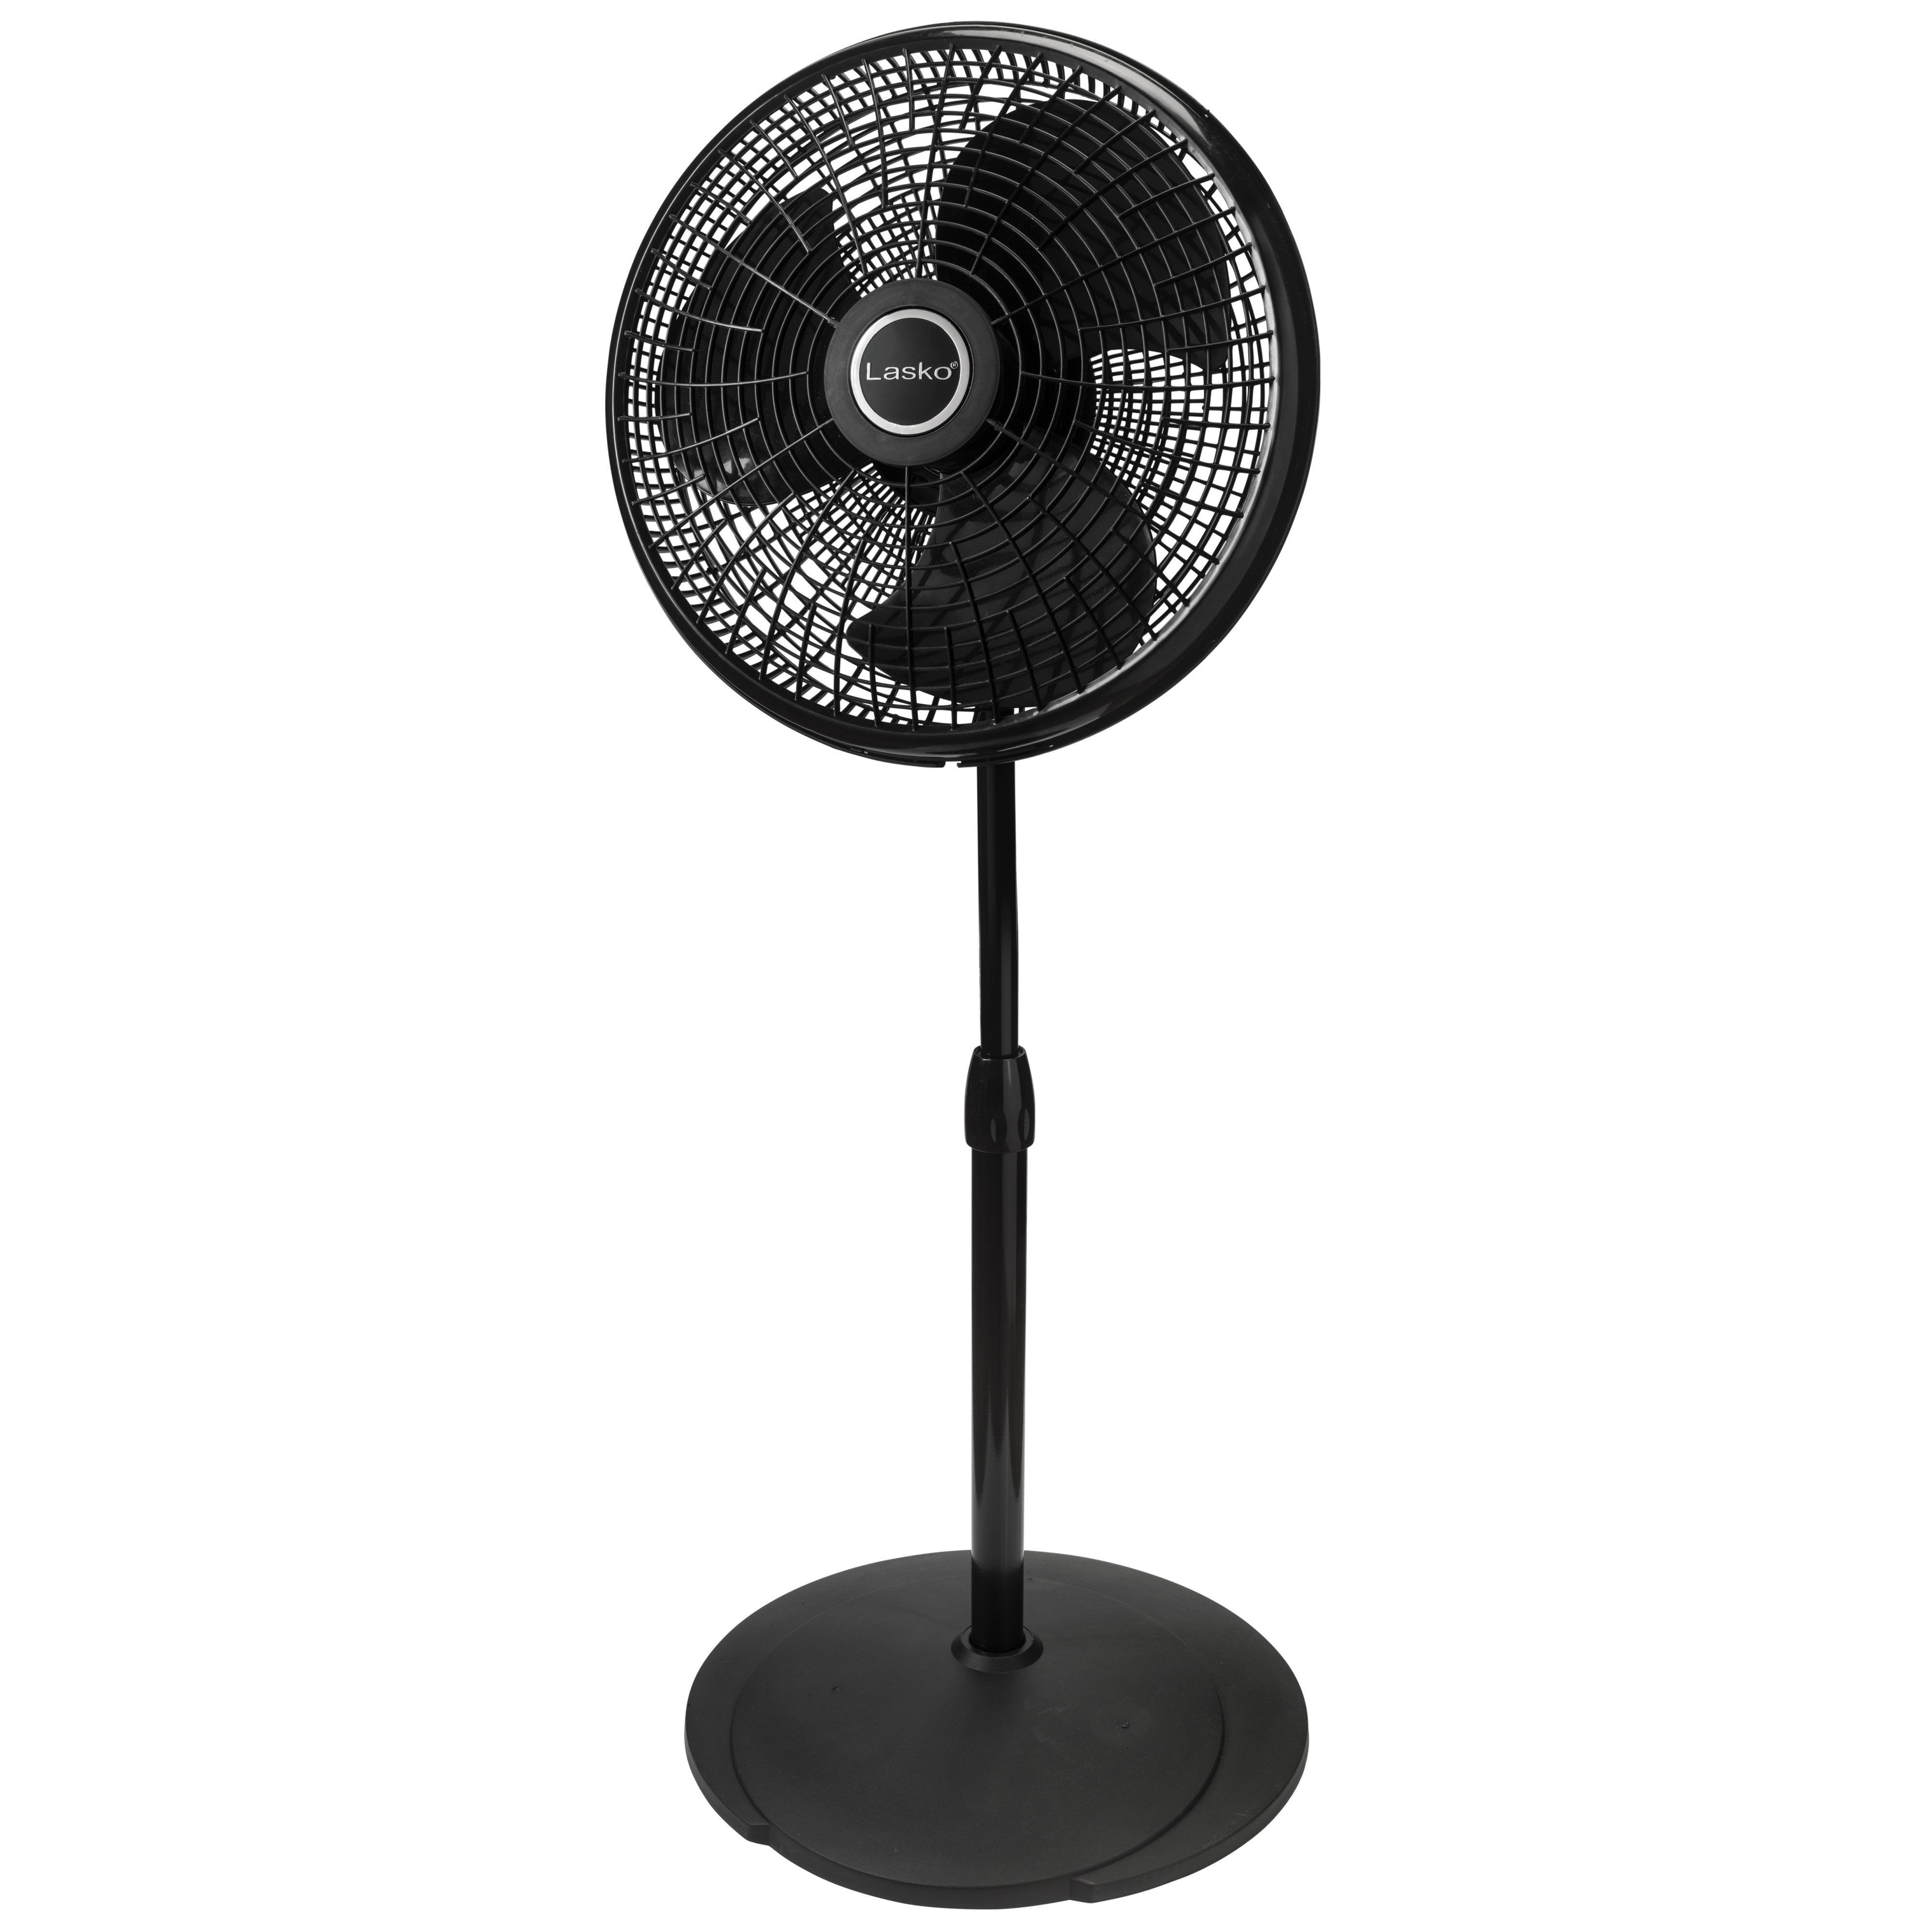  Lasko 16-inch 3-Speed Oscillating Floor Fan with Adjustable  Height, Tilt-Back Head, Widespread Oscillation, and Patented Blue Plug  Safety Fuse - Black : Home & Kitchen